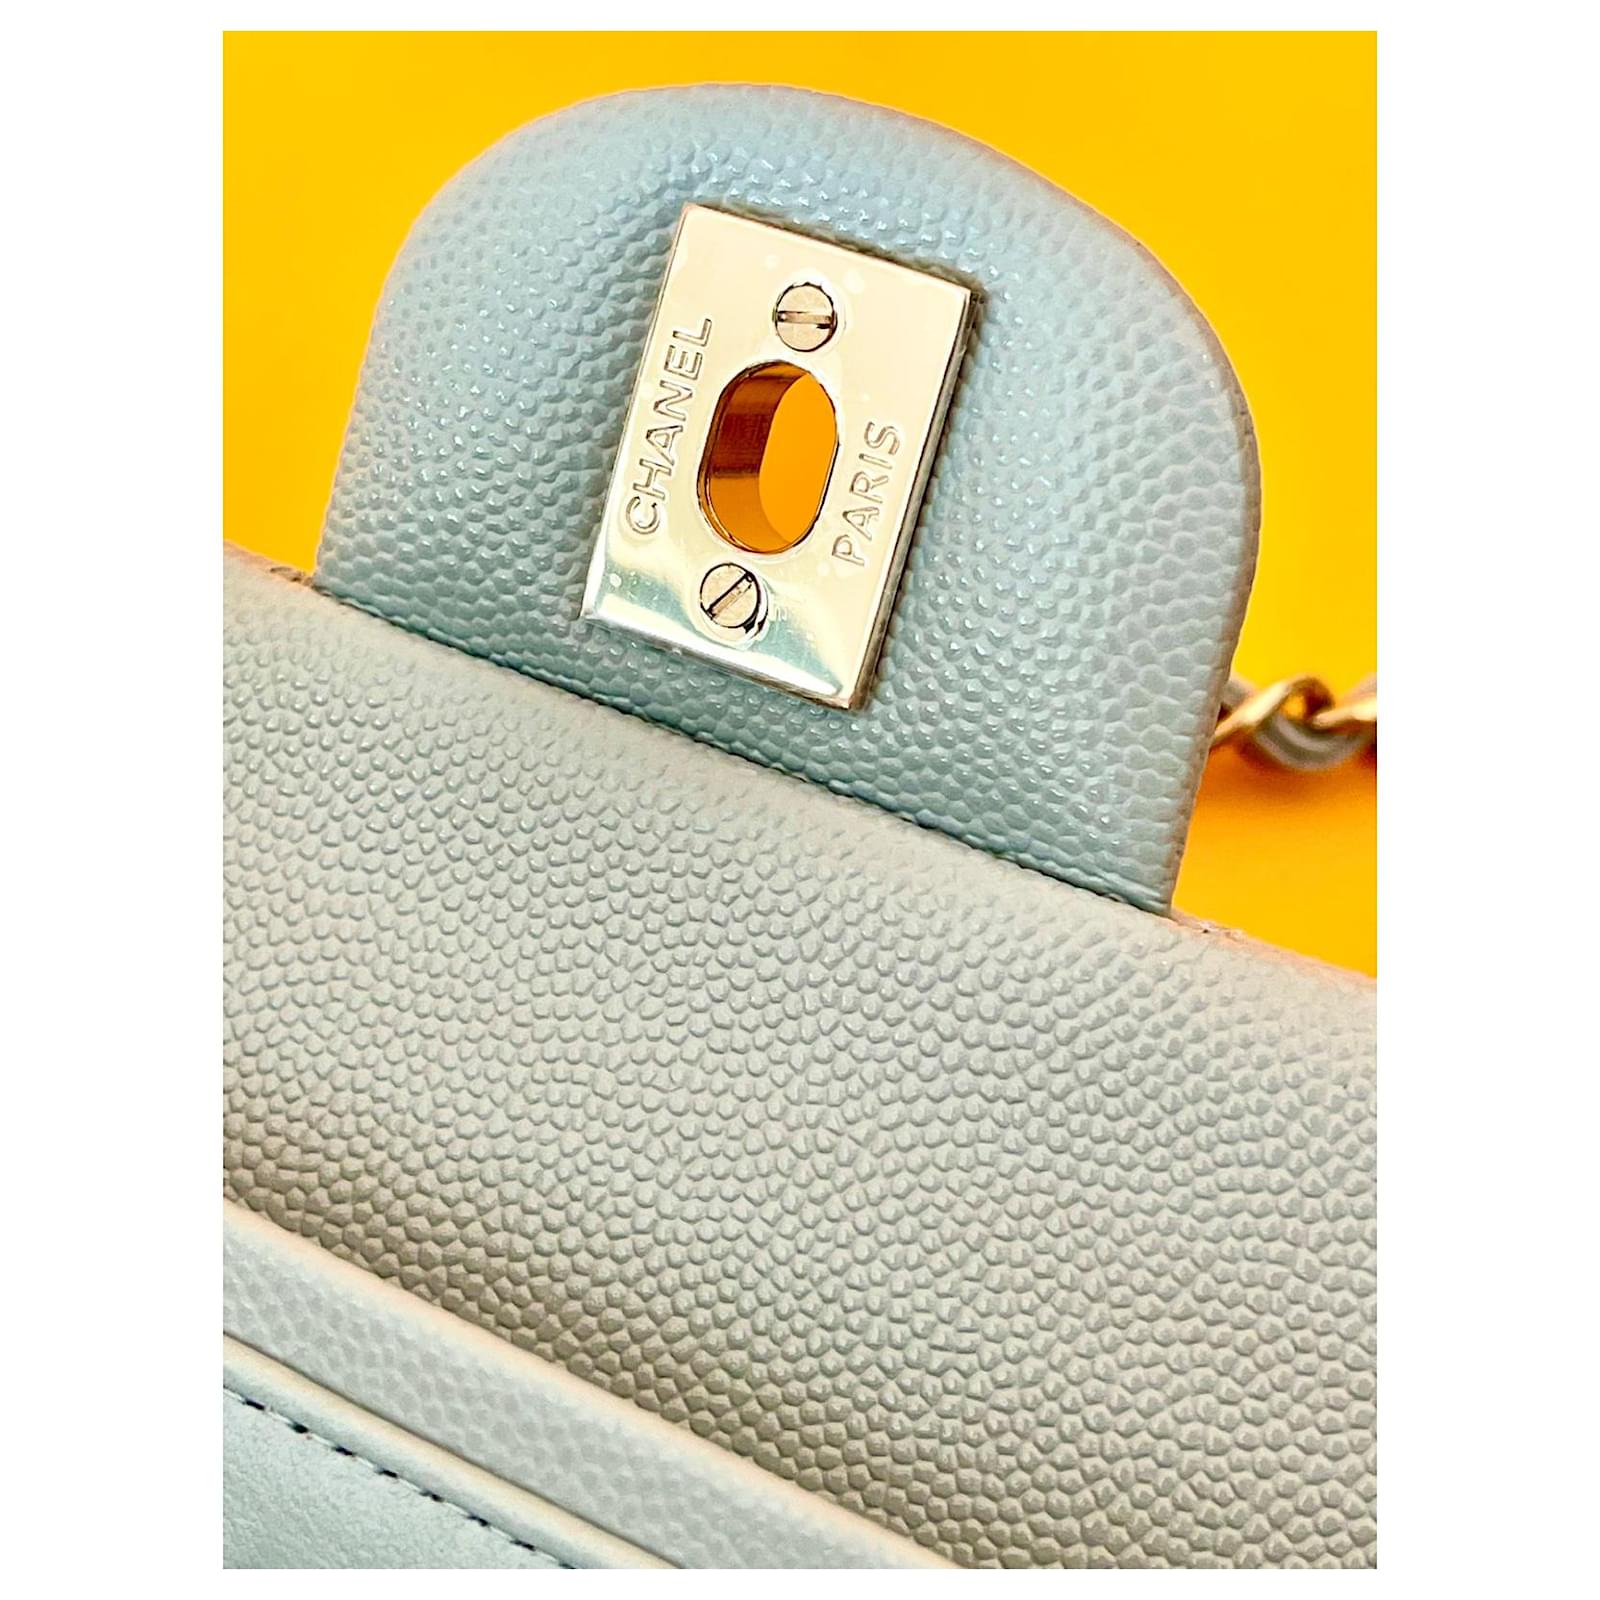 22P Chanel Classic lined Flap Caviar Leather Light Baby Blue.